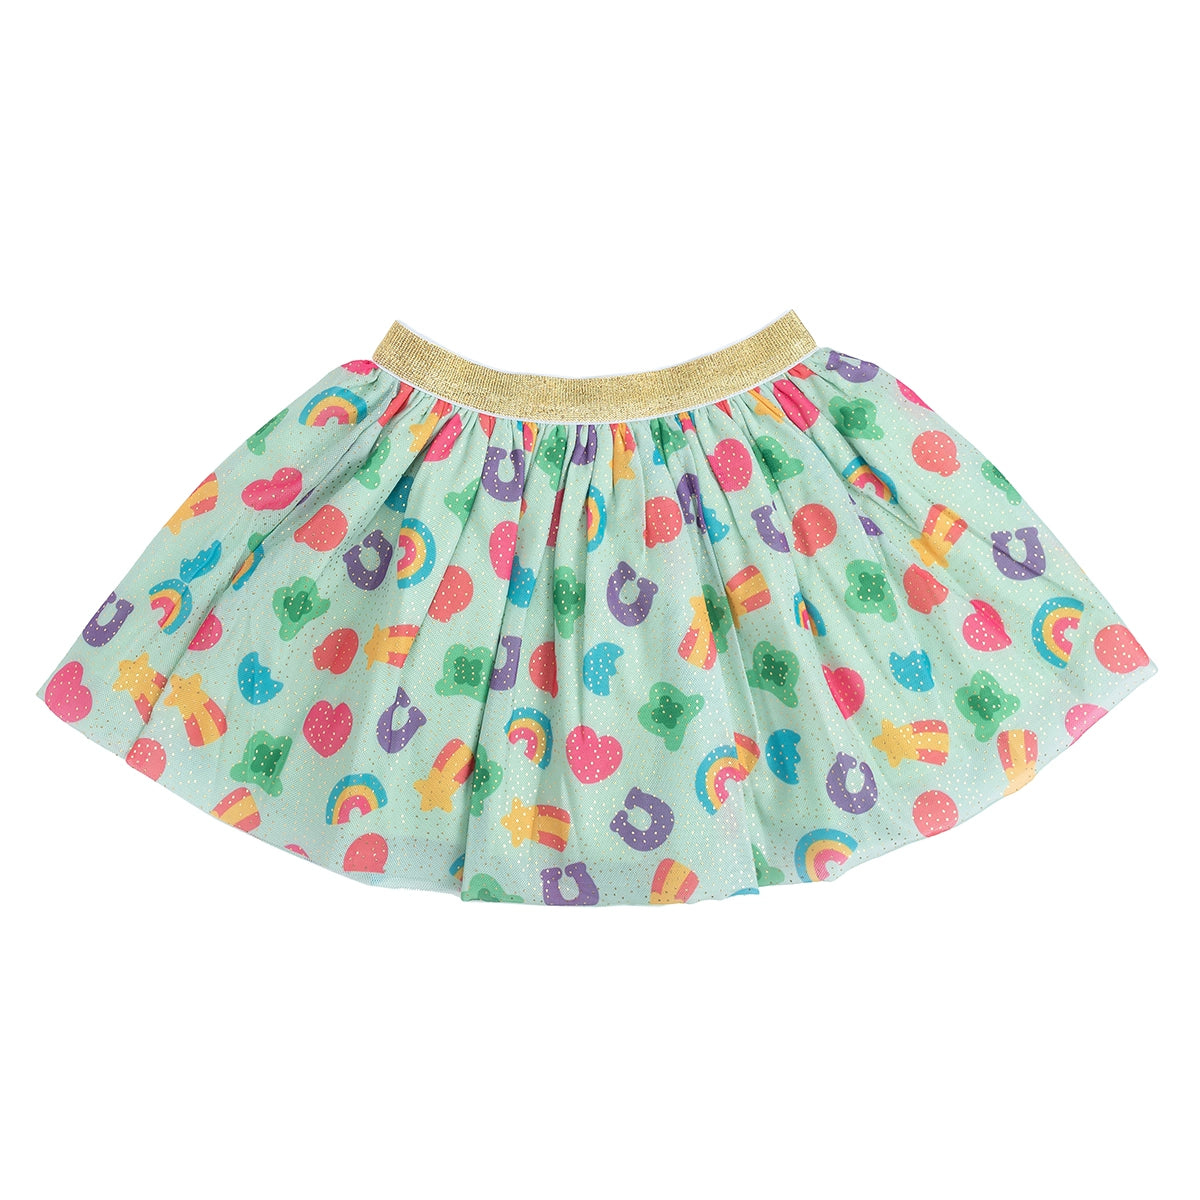 This Sweet Wink Lucky Charm Tutu is a fun skirt and dress up tutu for celebrating St. Patrick's Day! Features super soft light green tulle printed with a lucky charm pattern accented with gold glitter pin dots. Pale green cotton lining for added coverage and comfort. Non-shed gold glitter waistband.  Hand wash and line dry.  Women owned, mama owned. 